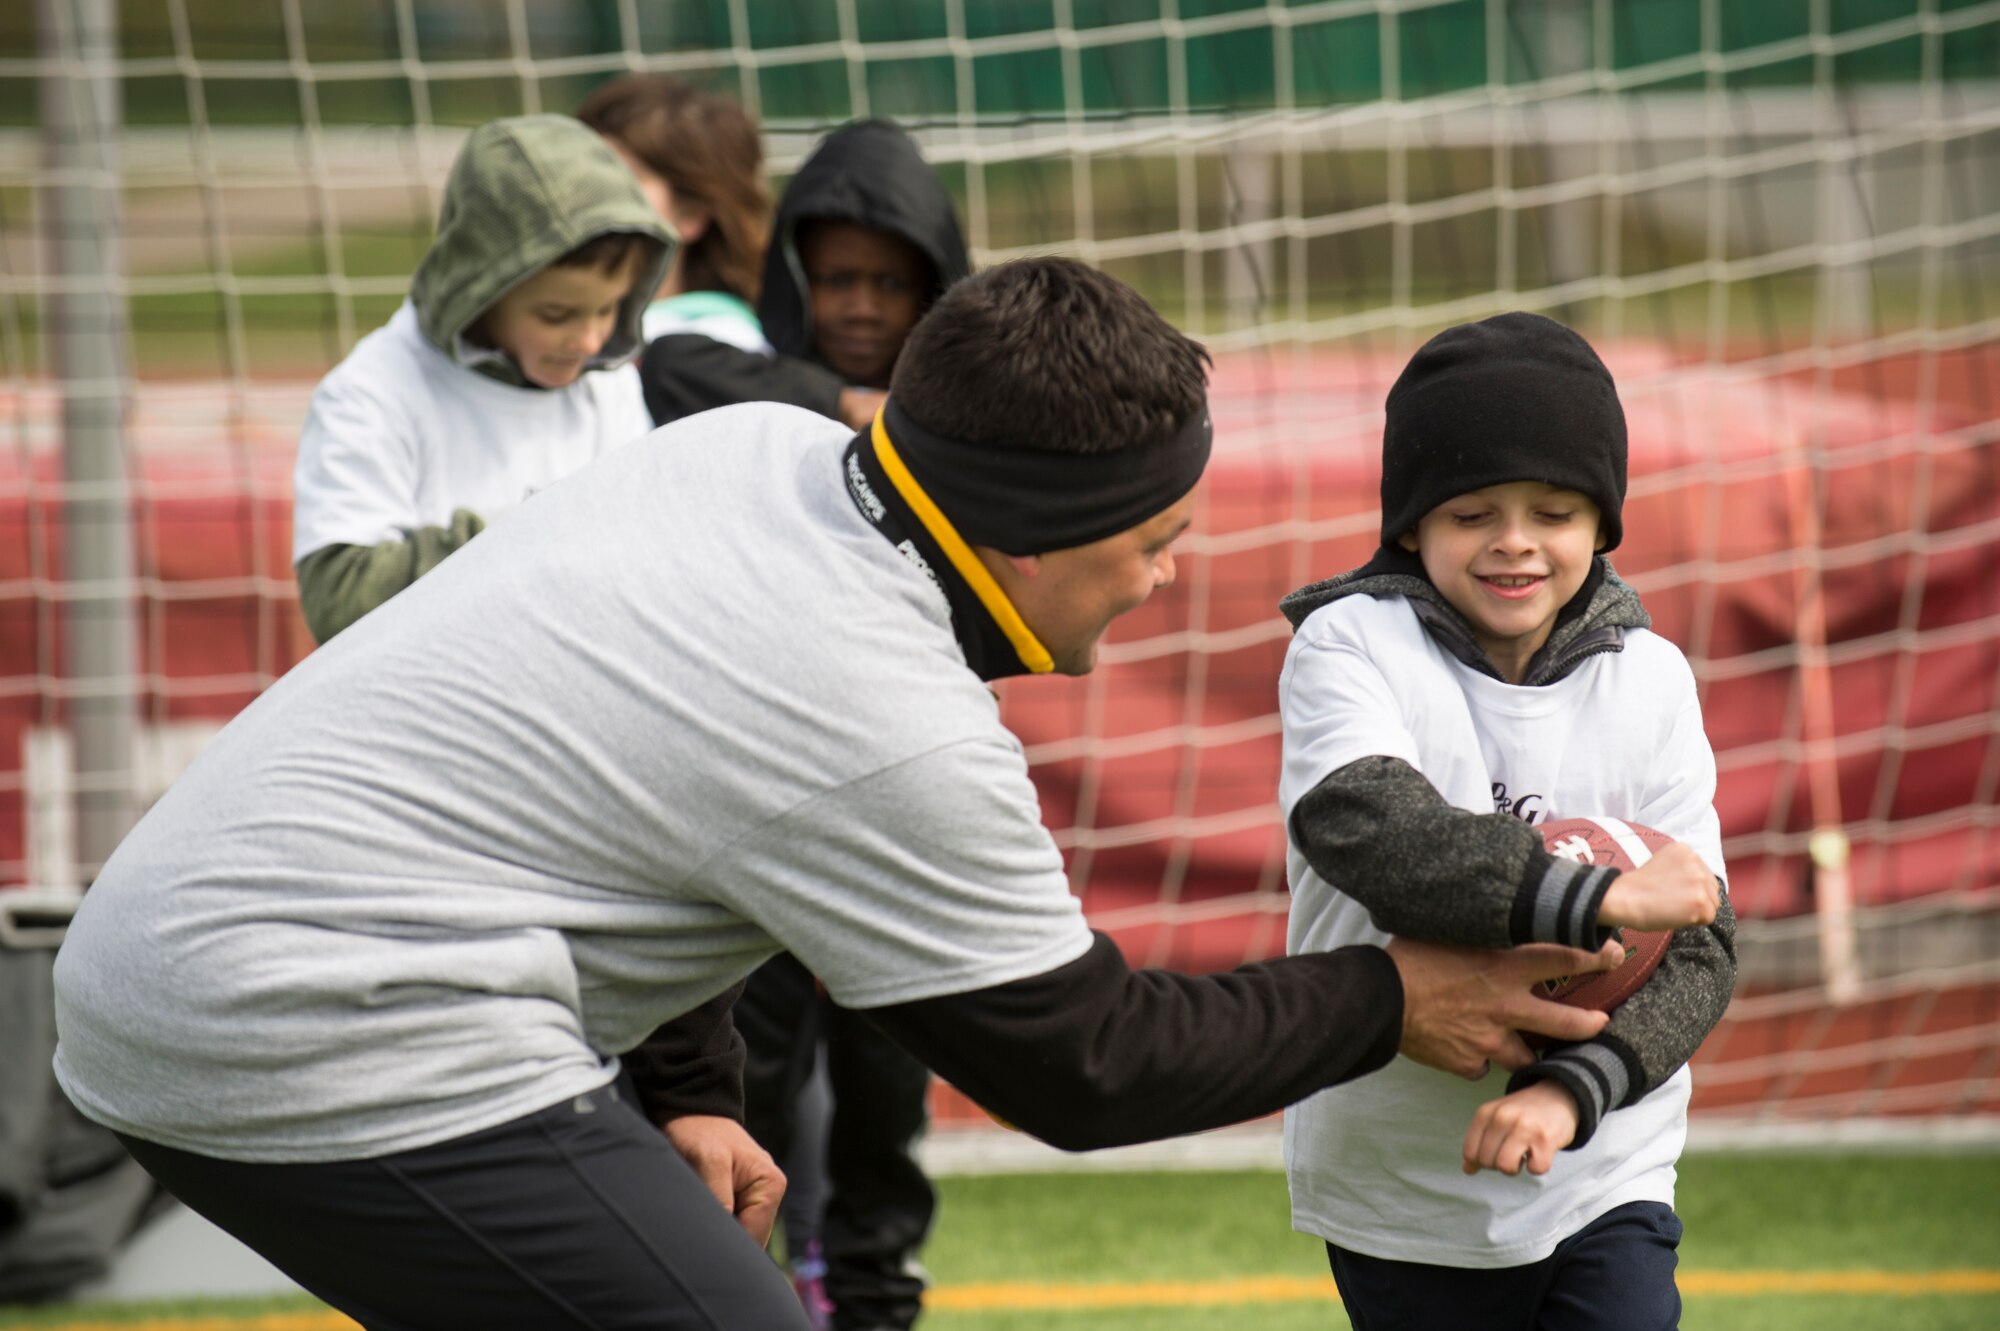 A volunteer coach hands the ball off to an Alejandro Villanueva football camp attendee during offensive drills at Kaiserslautern High School on Vogelweh Military Complex, Germany, April 13, 2019. Volunteer coaches from around the Kaiserslautern Military Community coached young football players on offensive and defensive drills, along with seven-on-seven games. (U.S. Air Force photo by Staff Sgt. Jonathan Bass)